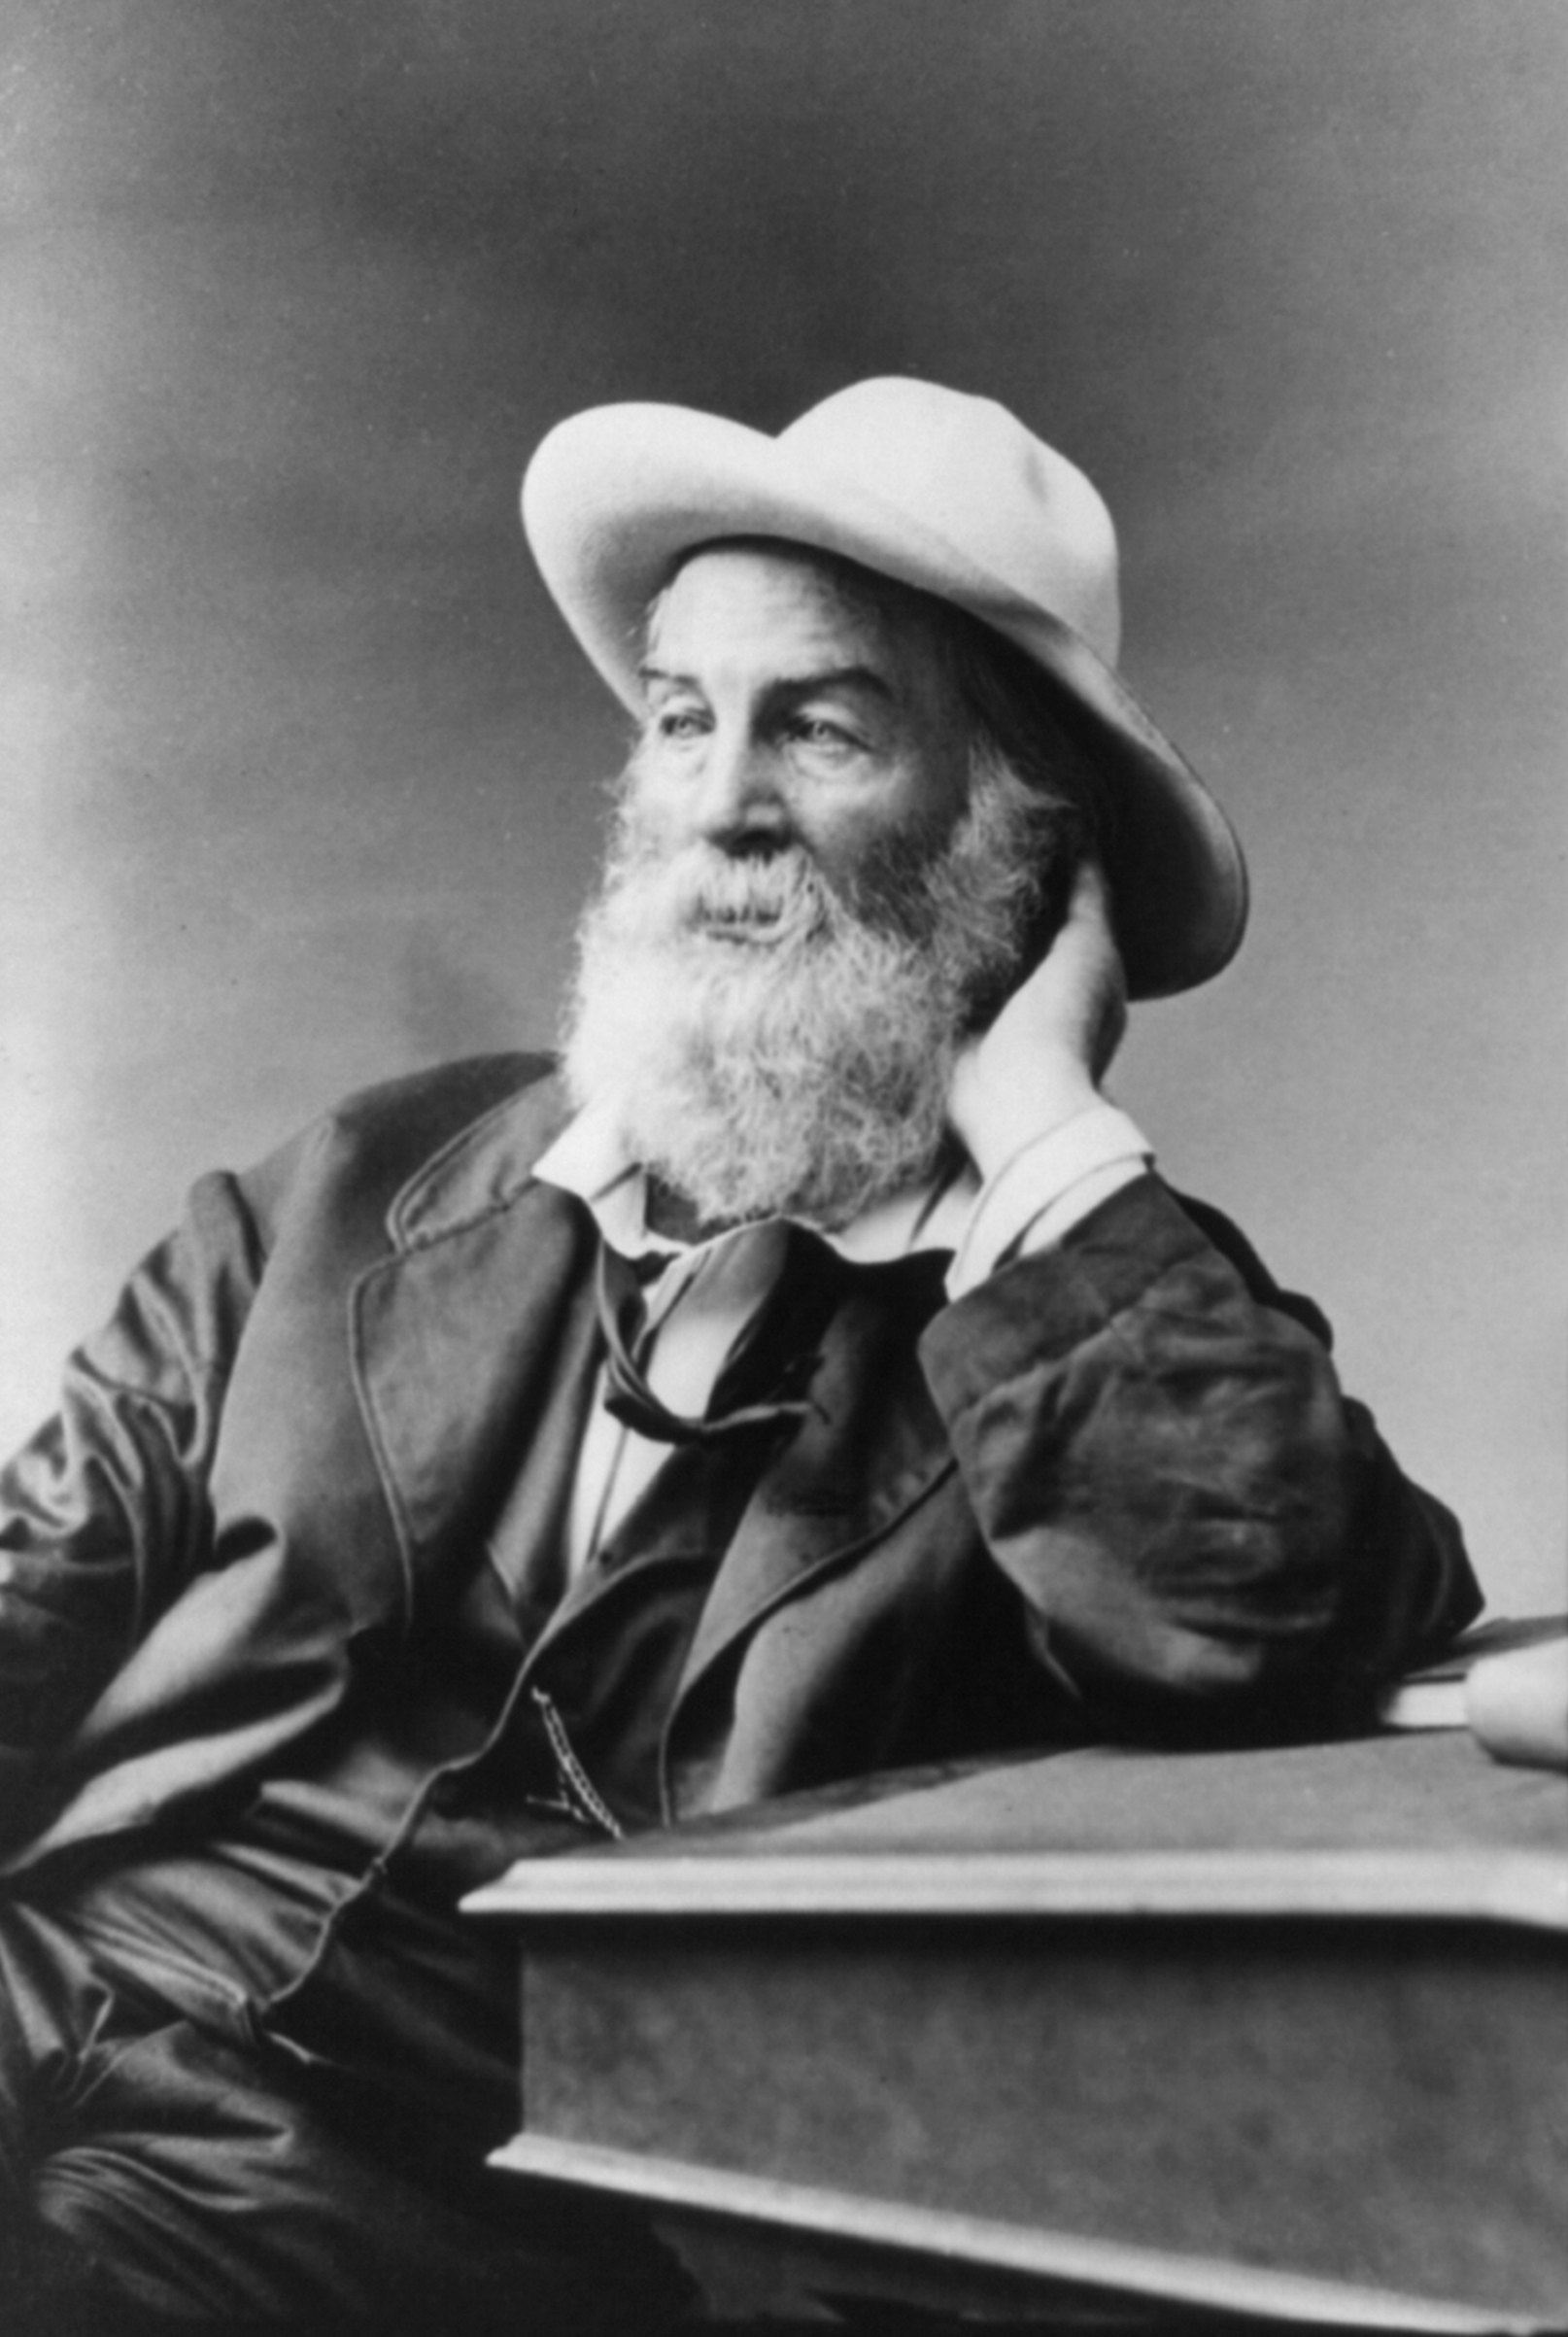 Poet Walt Whitman poses for a portrait in 1871. (Donaldson Collection/Getty Images)